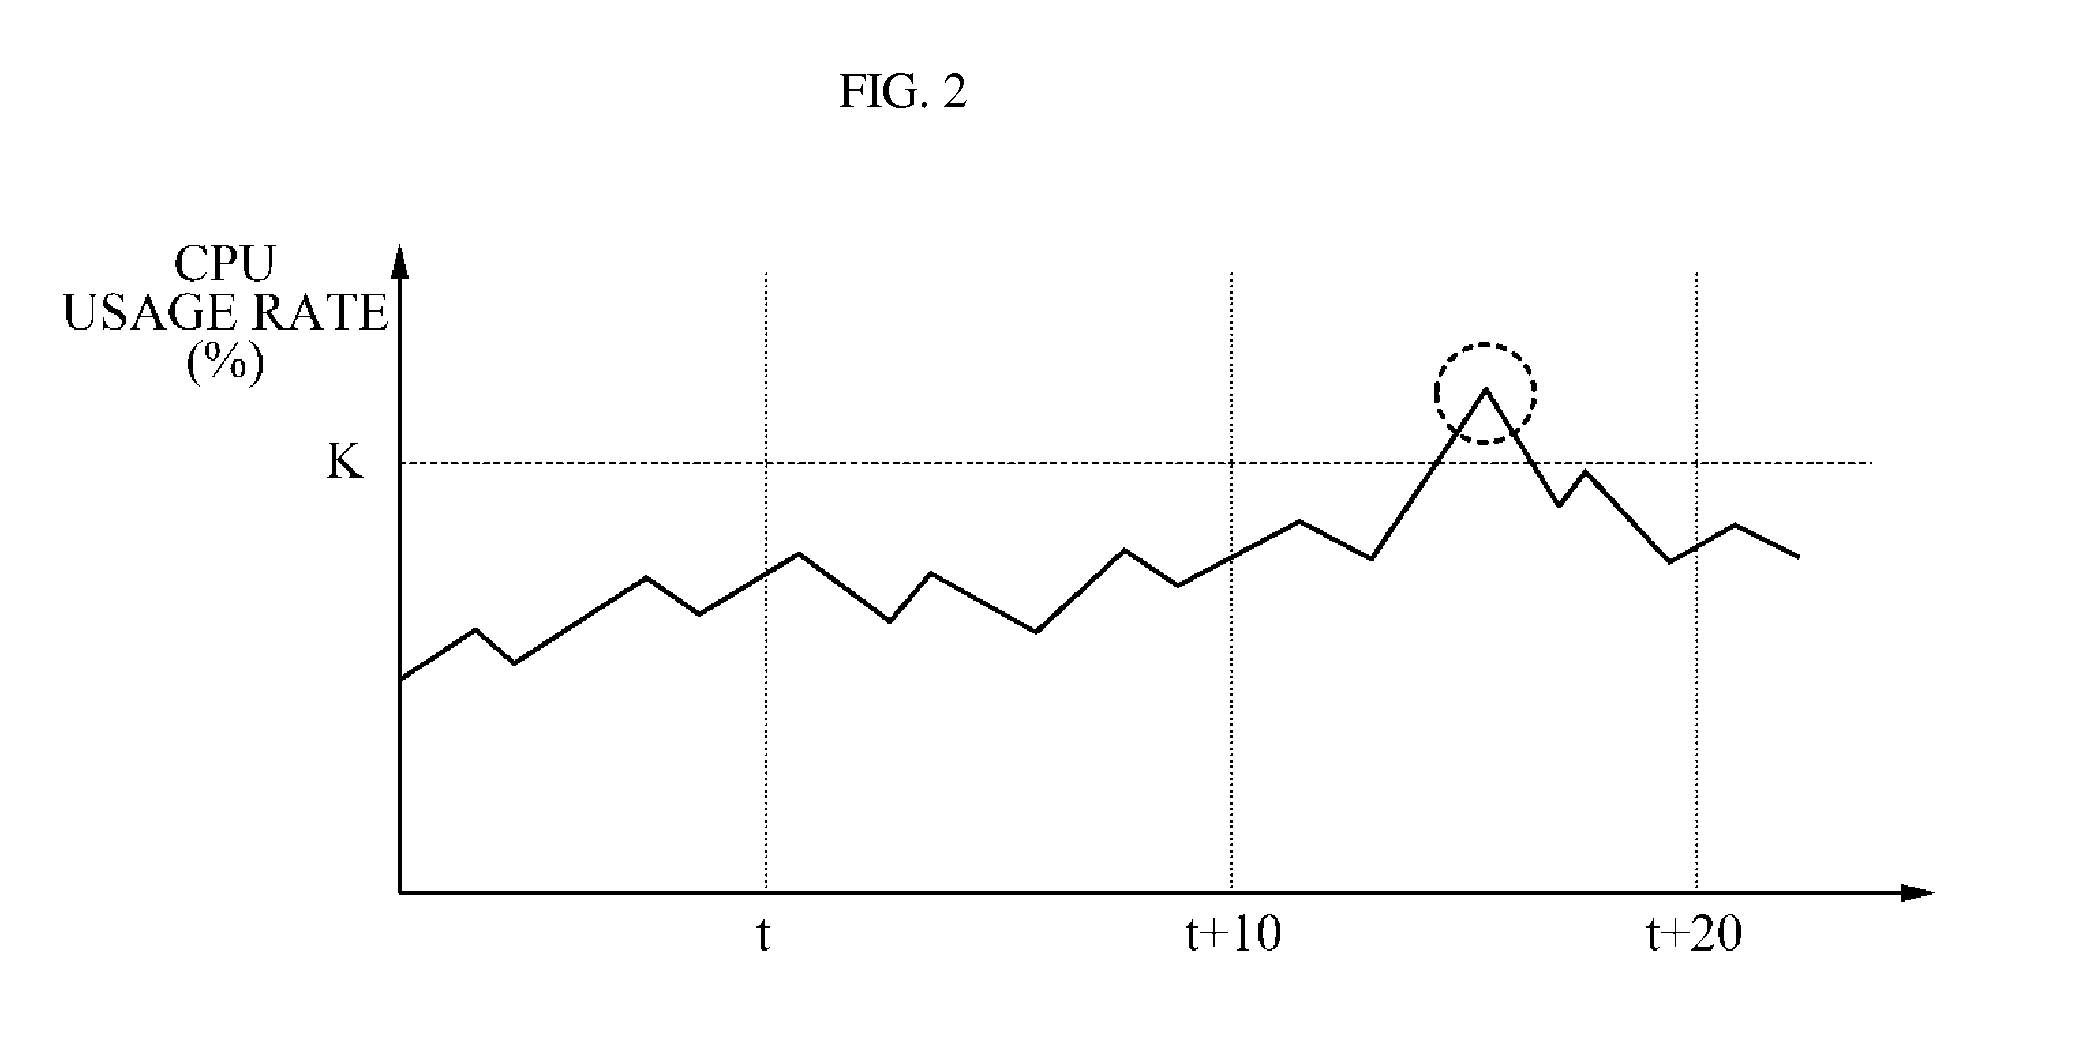 System and method for detecting and predicting anomalies based on analysis of time-series data